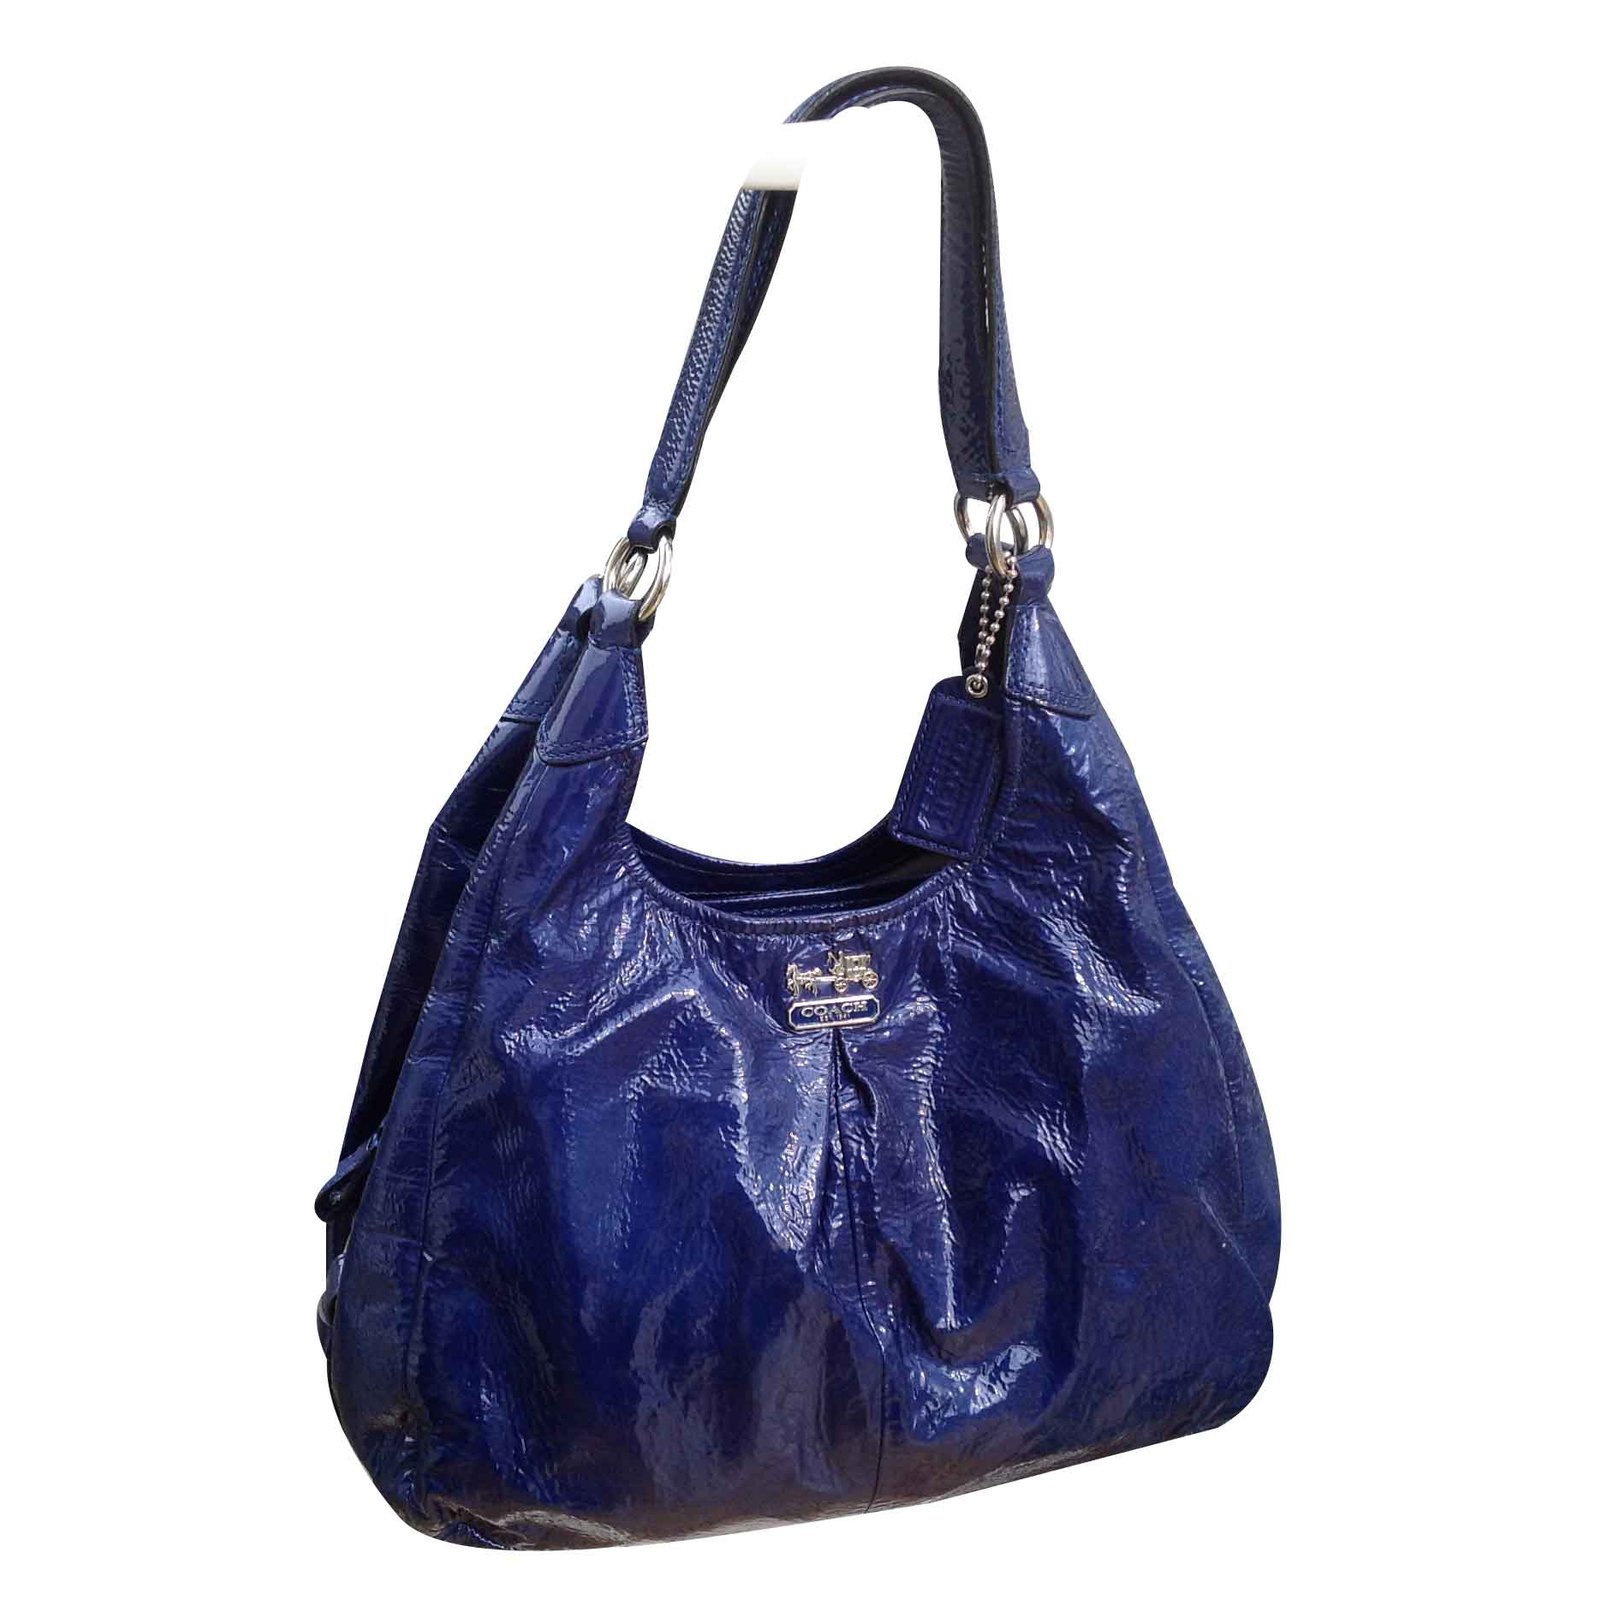 Coach Blue Patent Leather Handbags | Confederated Tribes of the Umatilla Indian Reservation